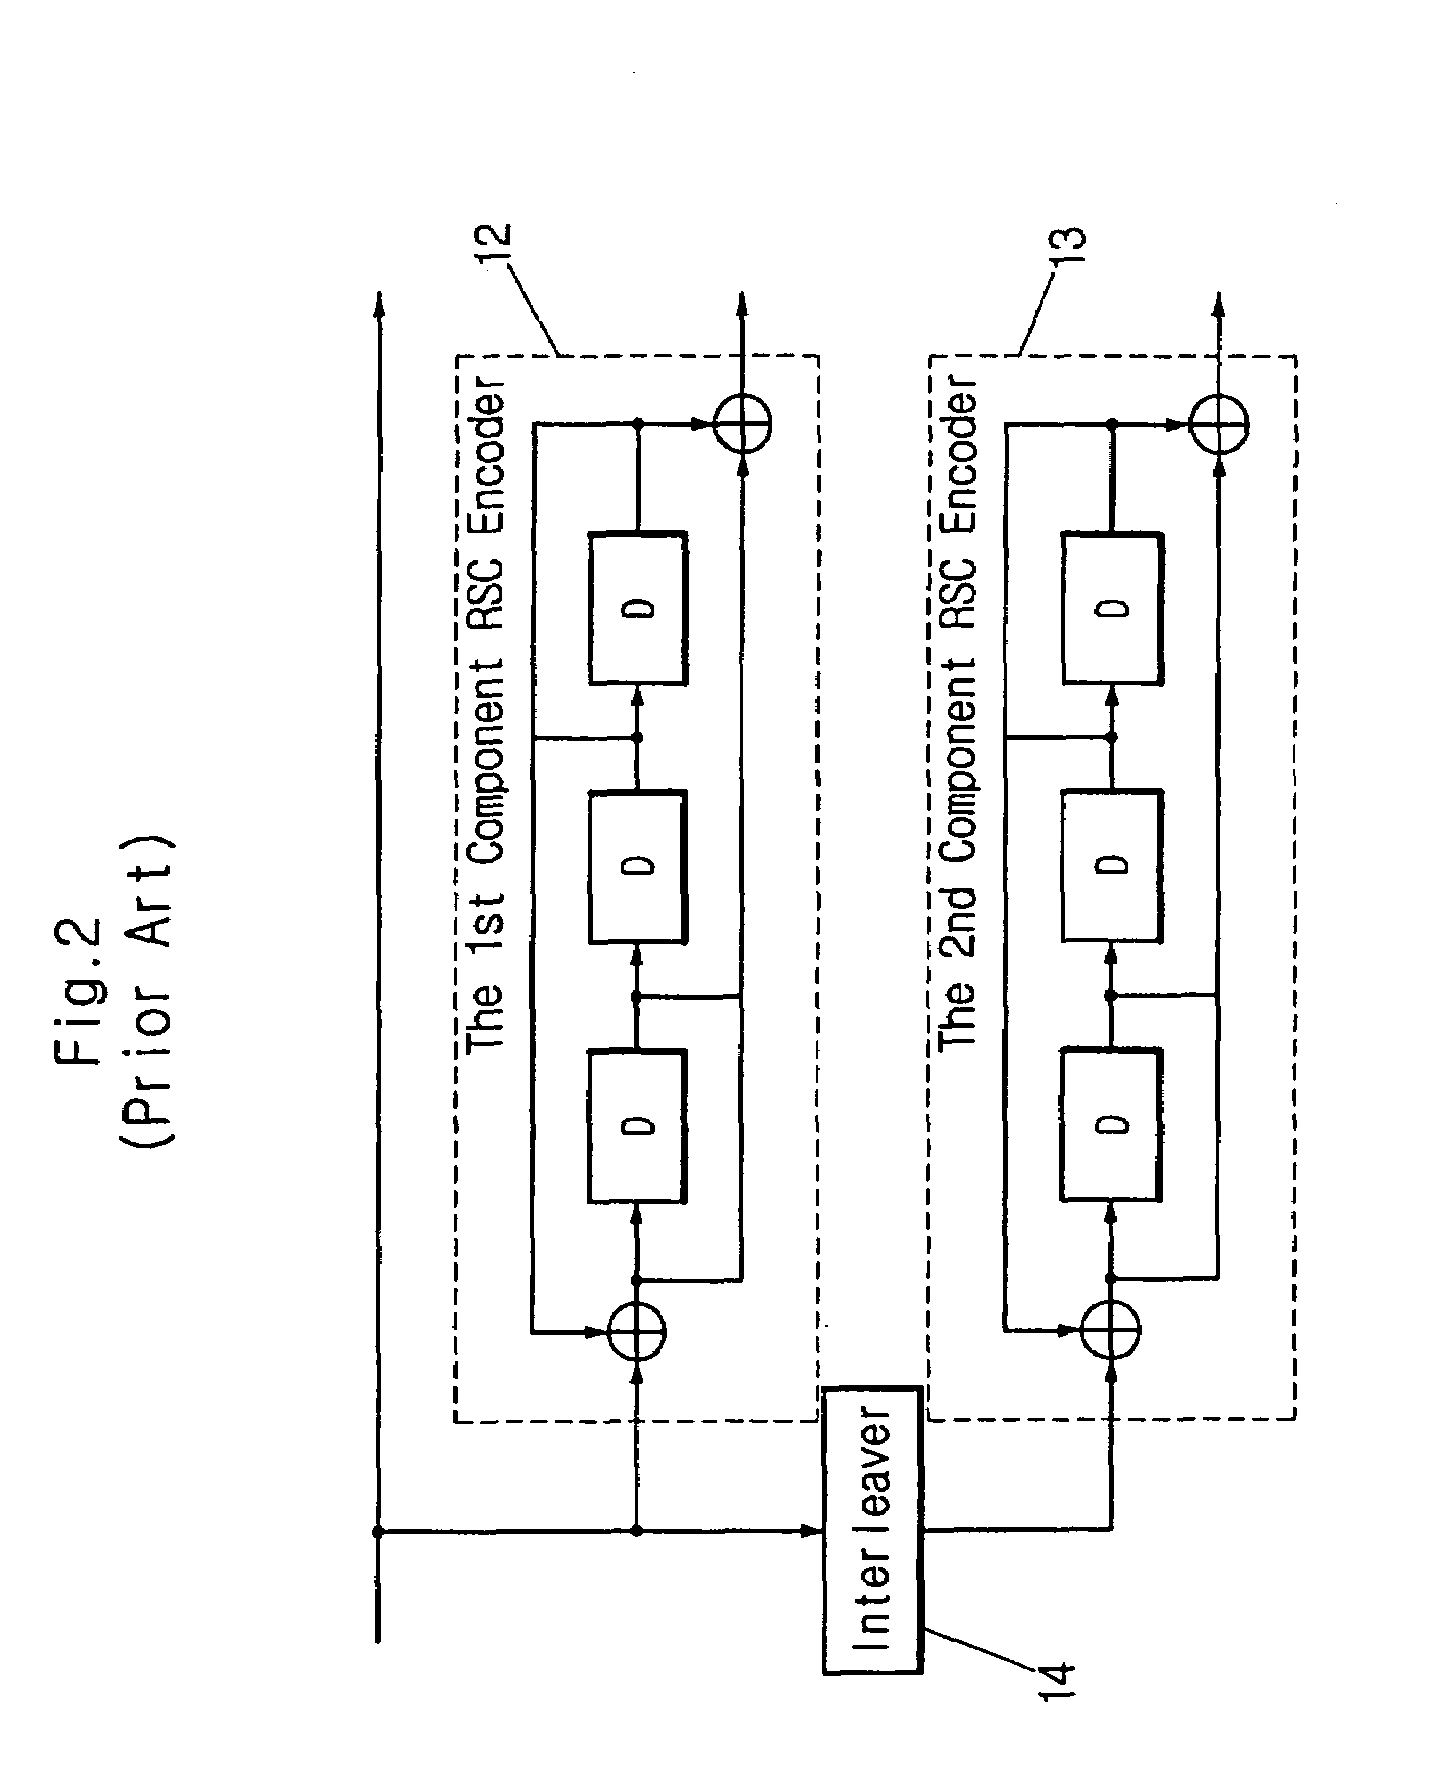 Turbo encoded hybrid automatic repeat request system and error detection method